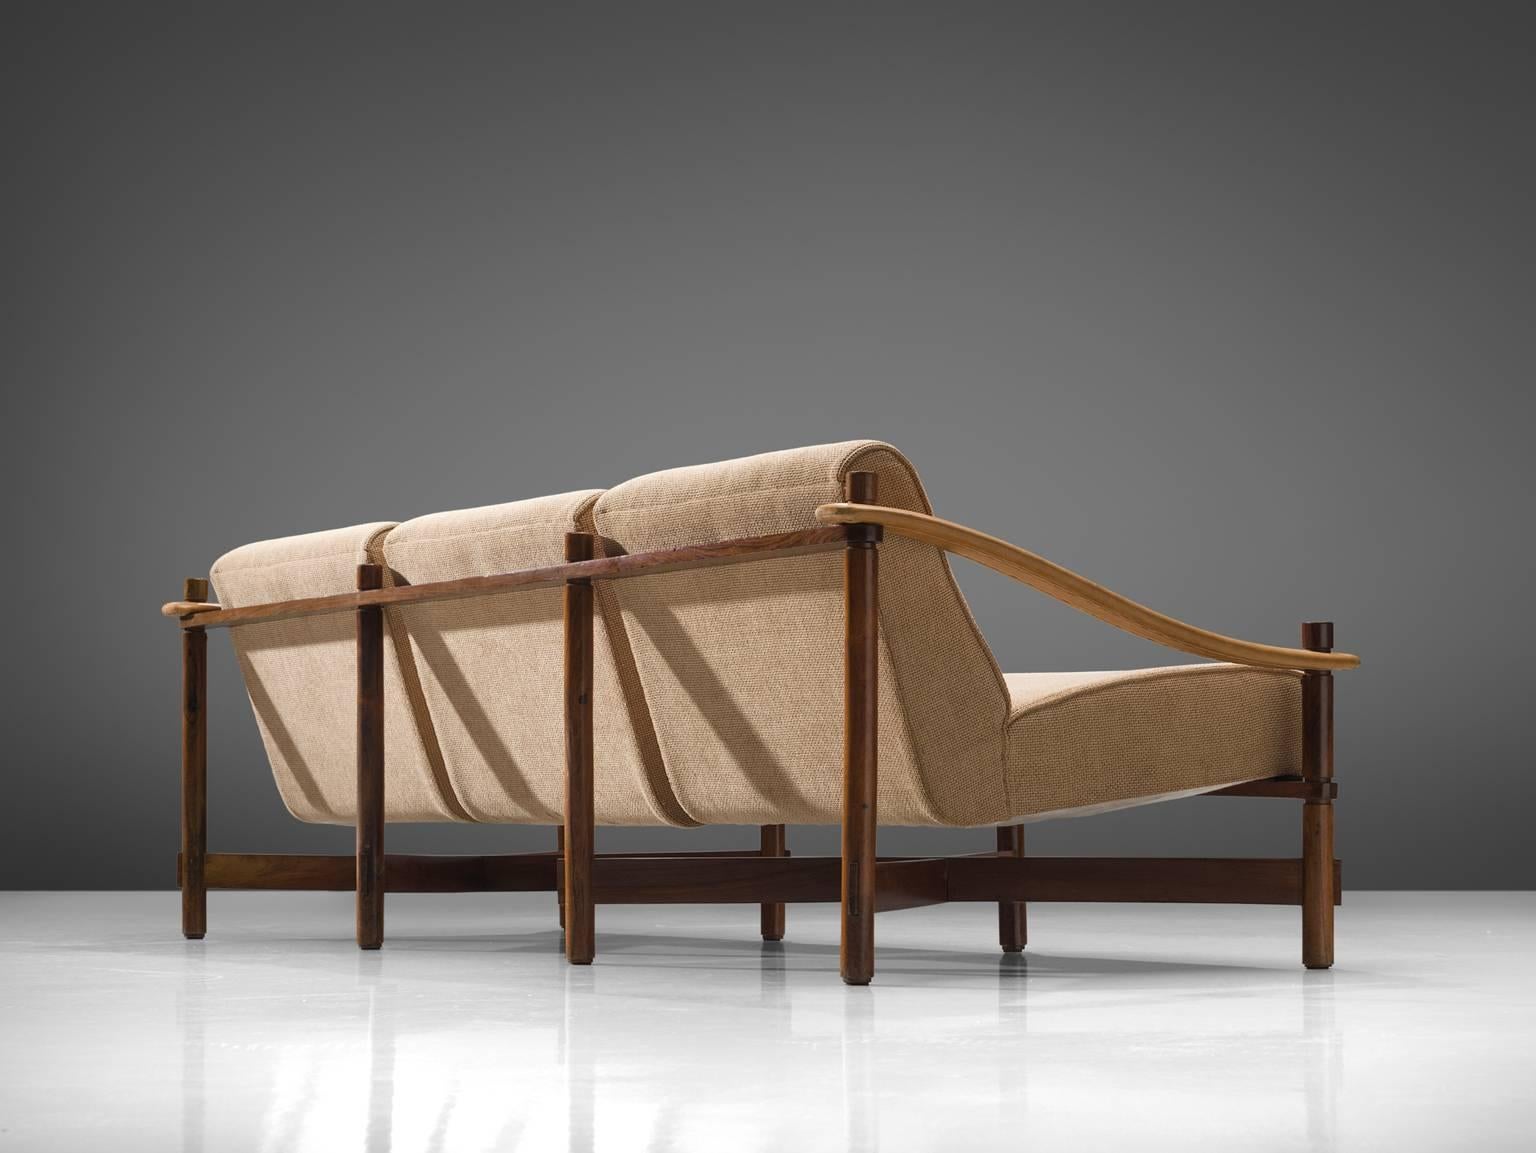 Michel Arnoult for Mobilia Contemporanea, three seater sofa, rosewood, leather, beige fabric, Brazil, 1965.

This rare Brazilian sofa is of the highest-quality in both material and design. The combination of the thick woolen upholstery, the warm